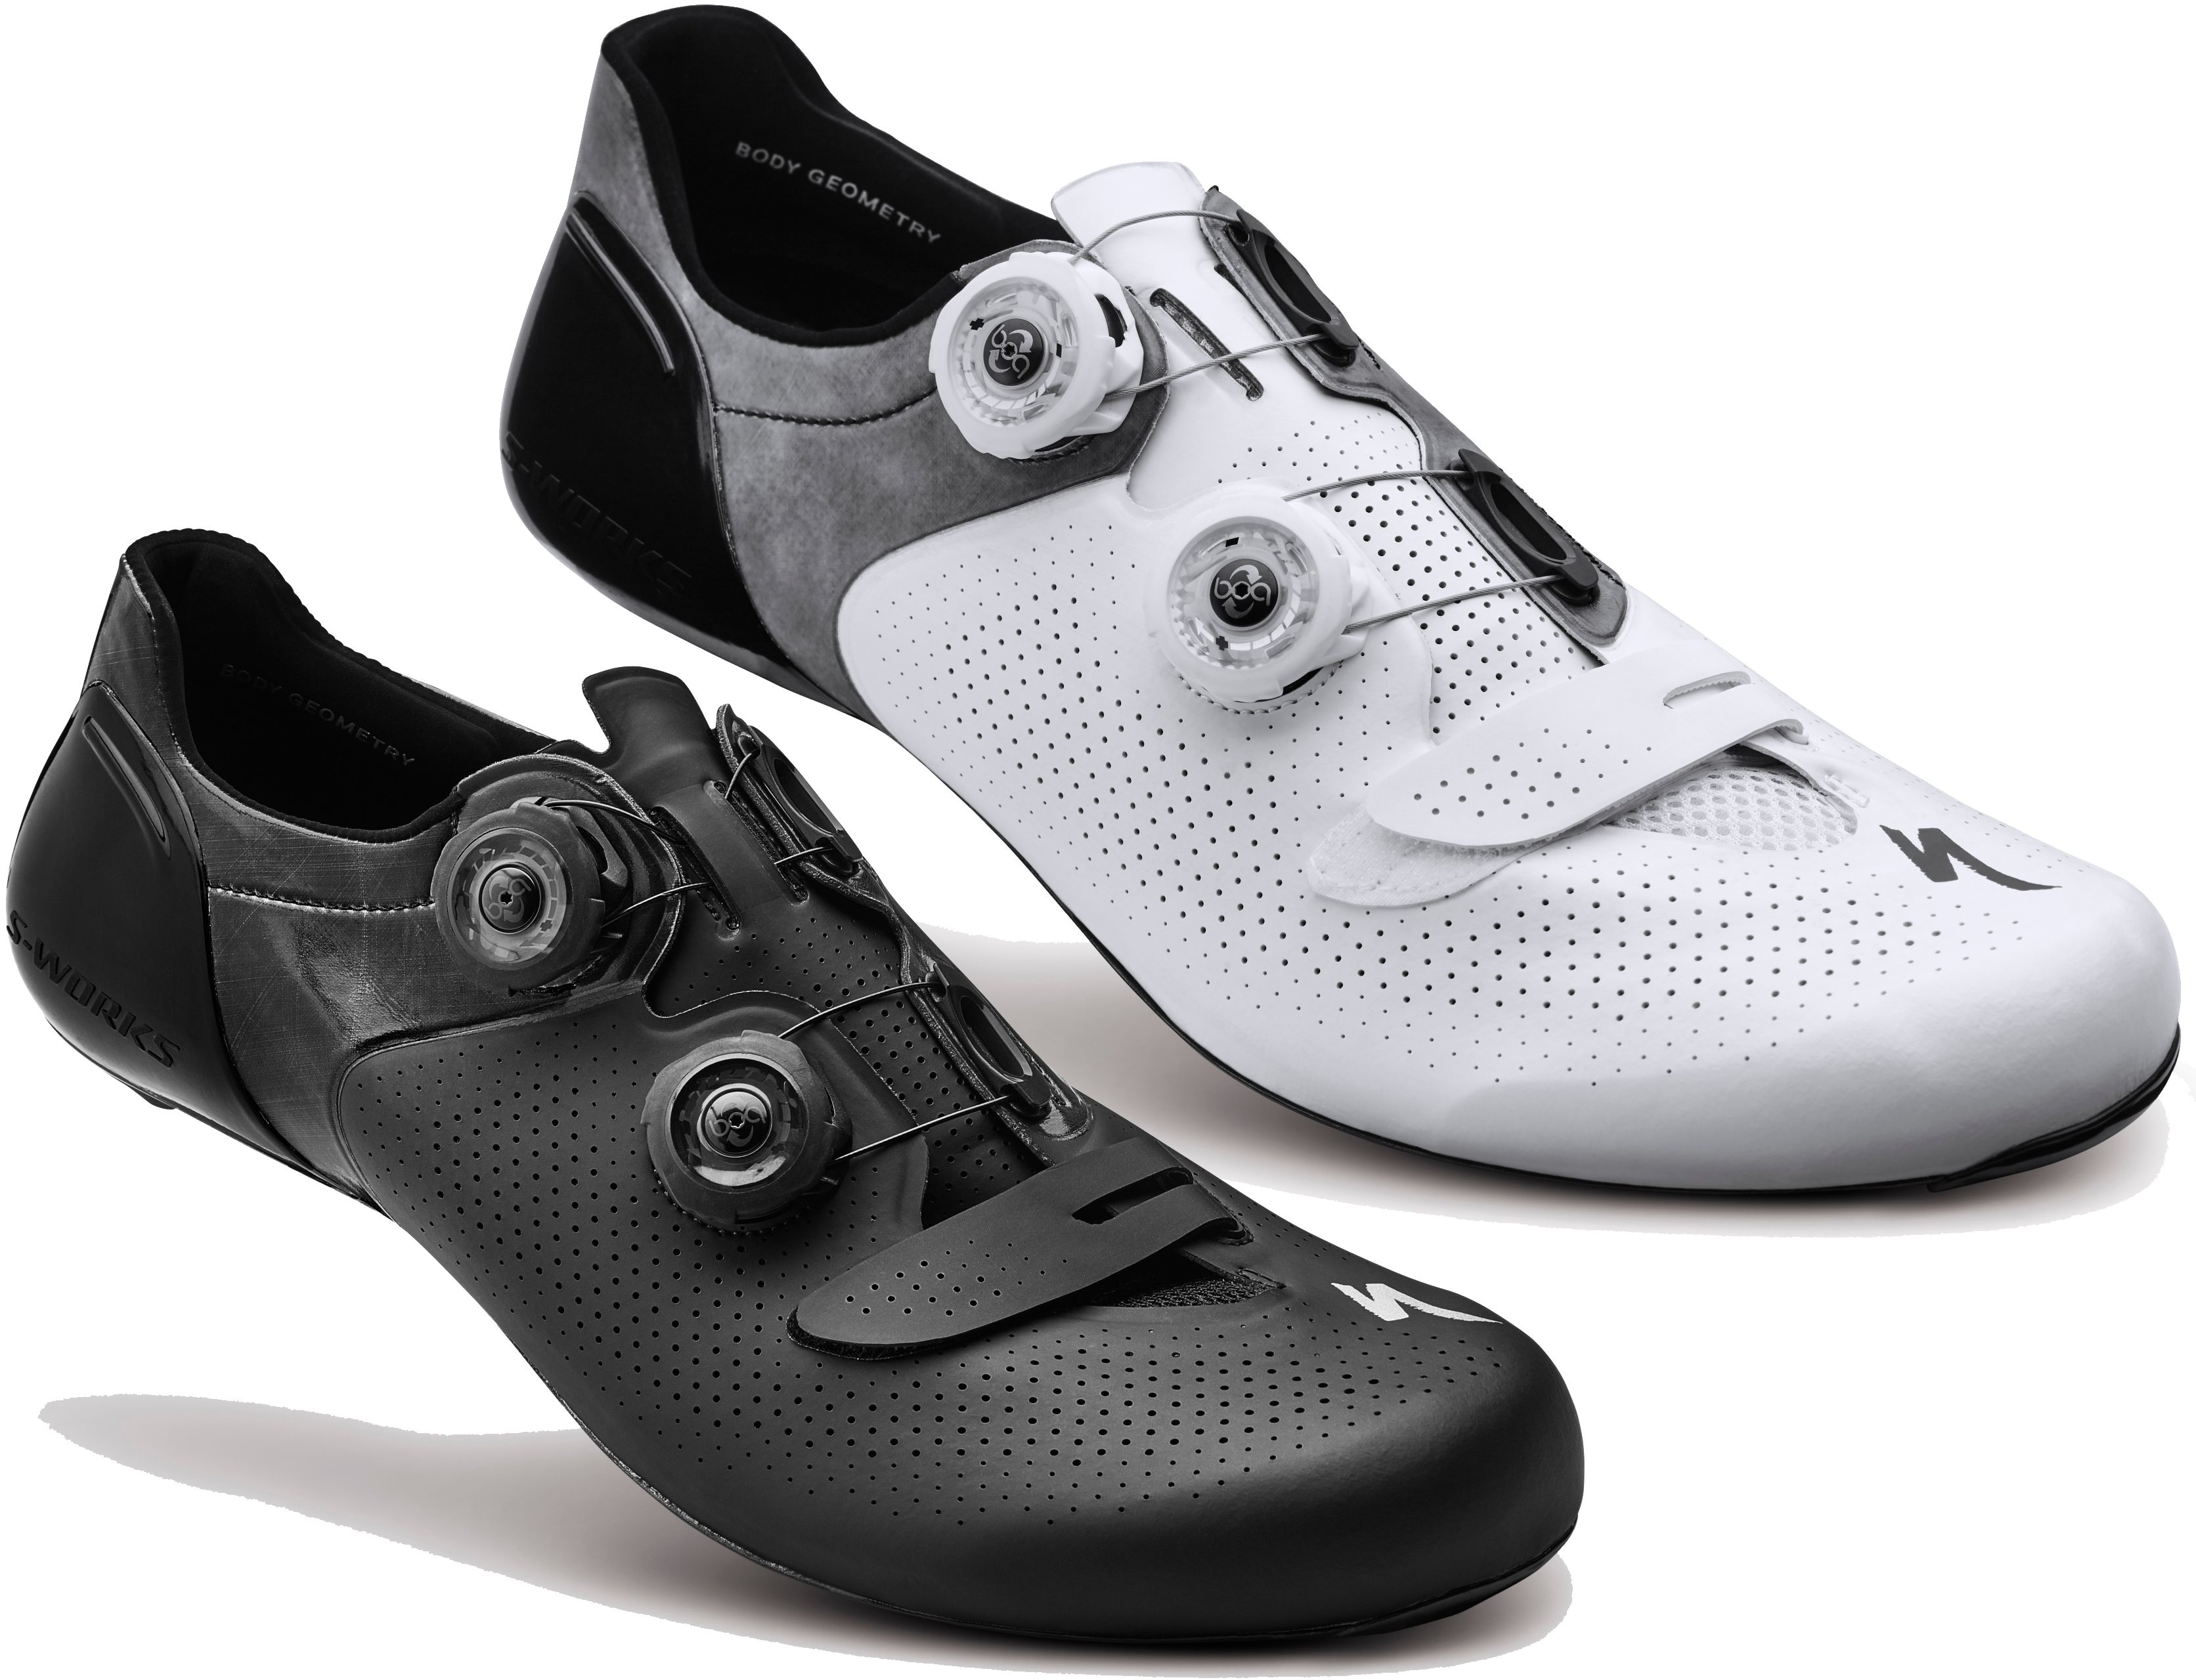 Specialized SWORKS 6 Road Shoe £185.99 Shoes Road Cycling Cyclestore